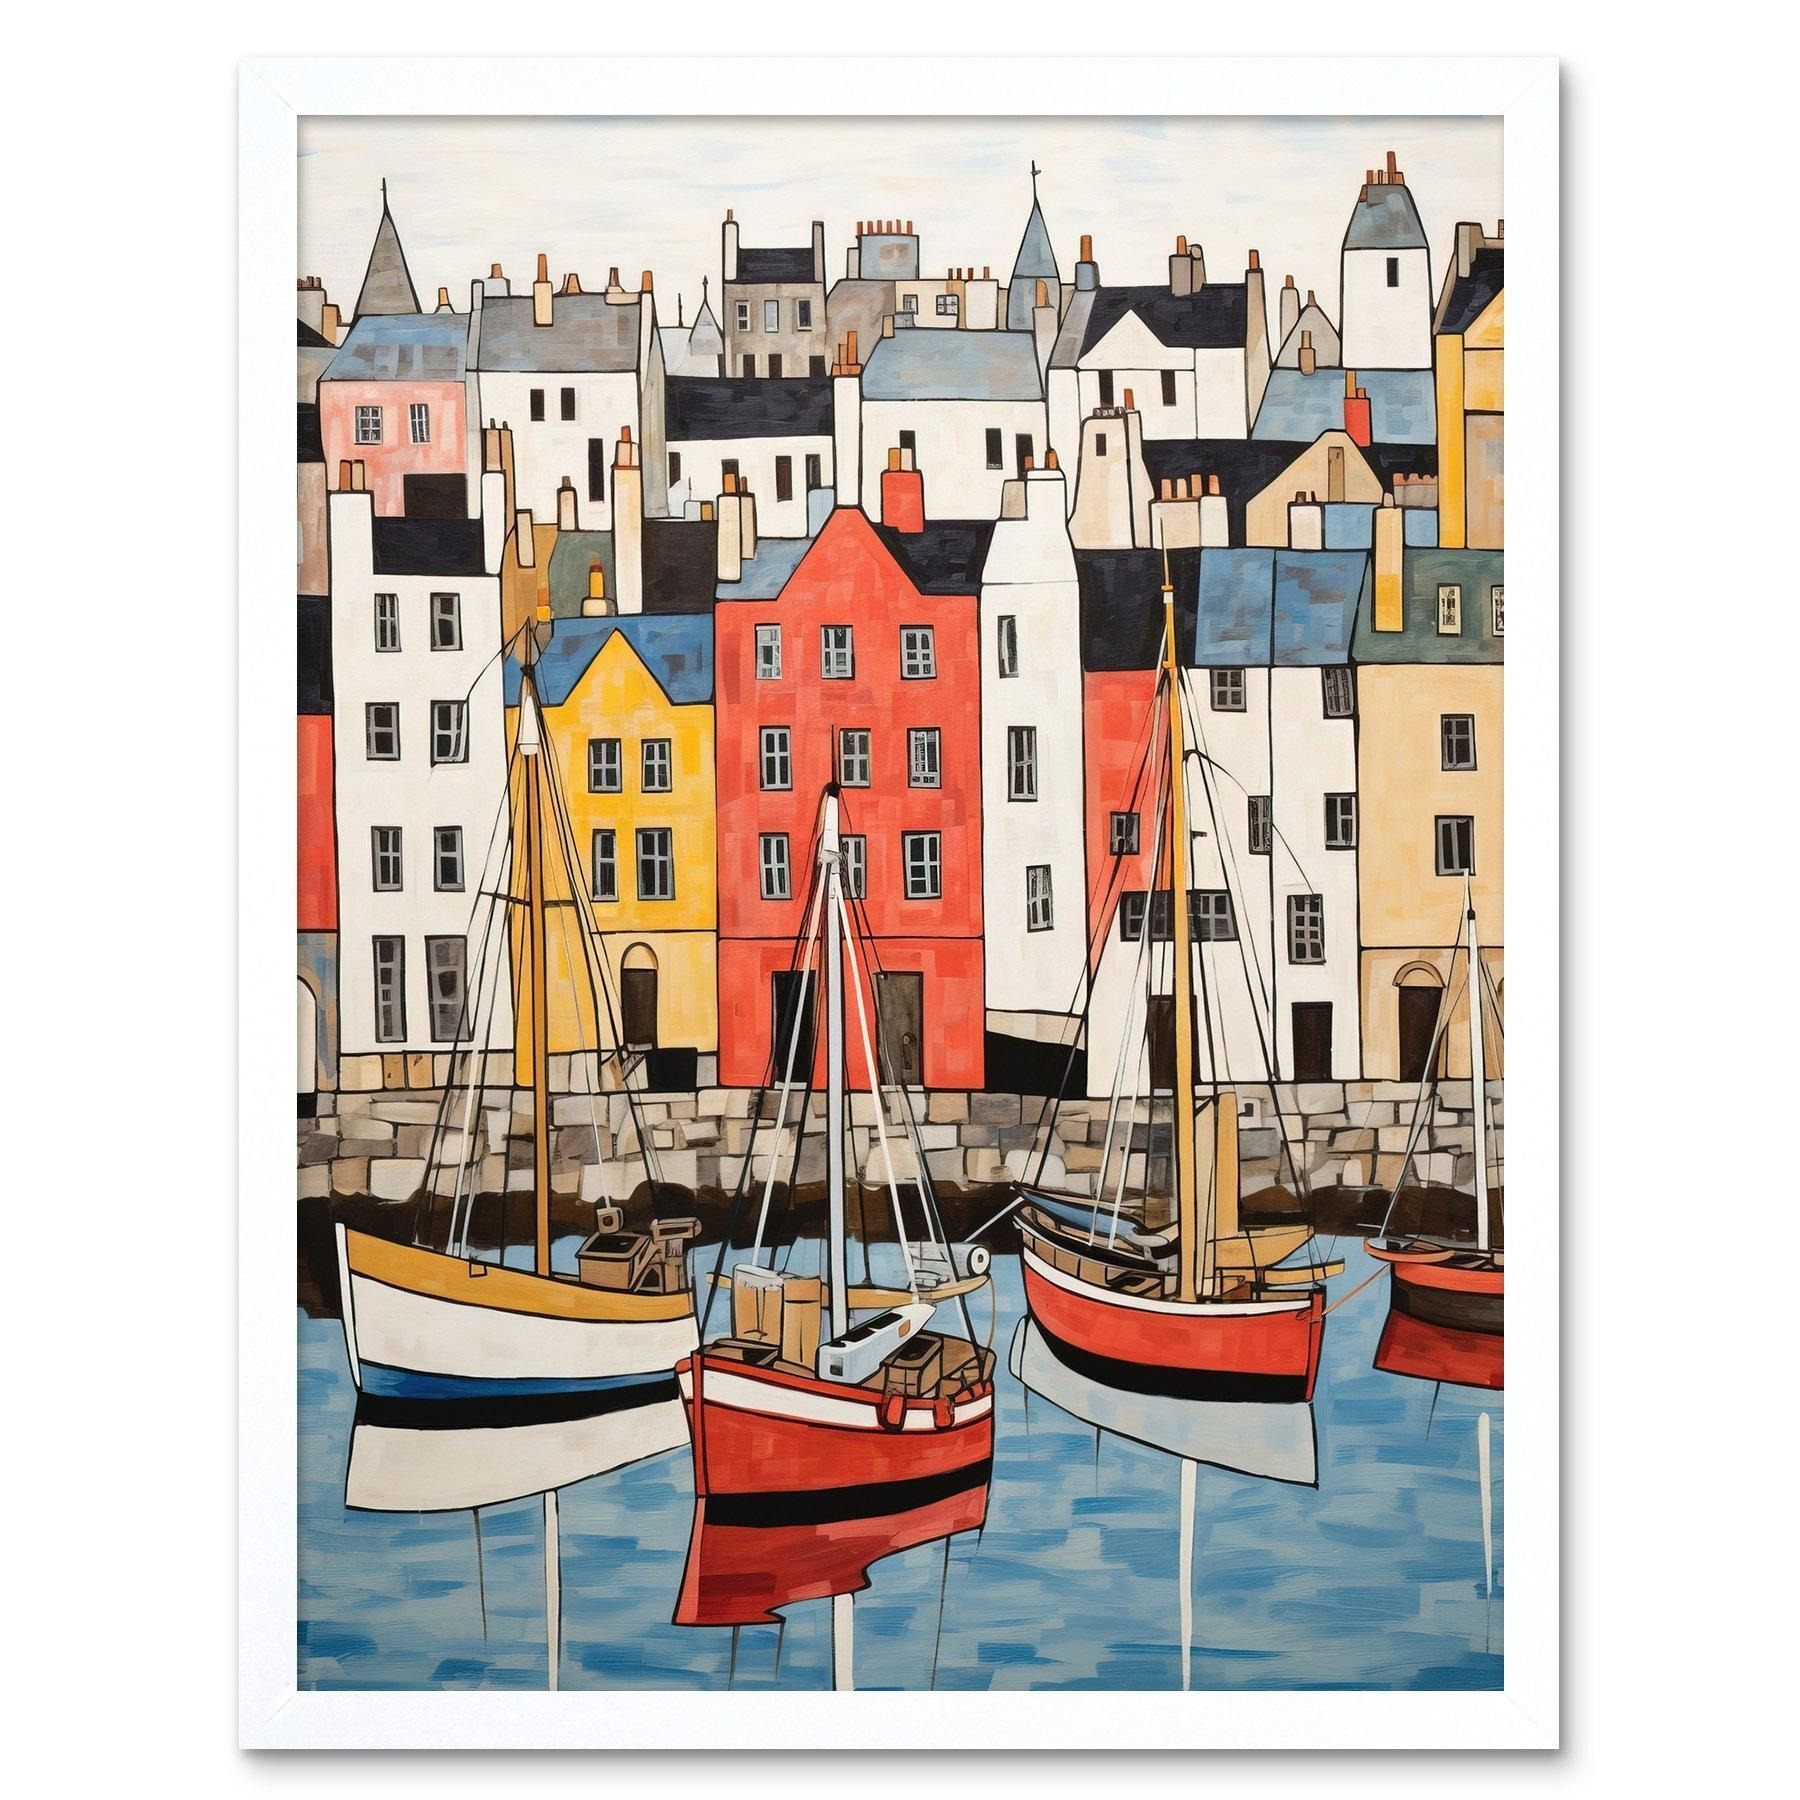 Colourful Town Harbour Acrylic Painting Red Yellow Blue Fishing Boats Coastal Townscape Art Print Framed Poster Wall Decor 12x16 inch - image 1